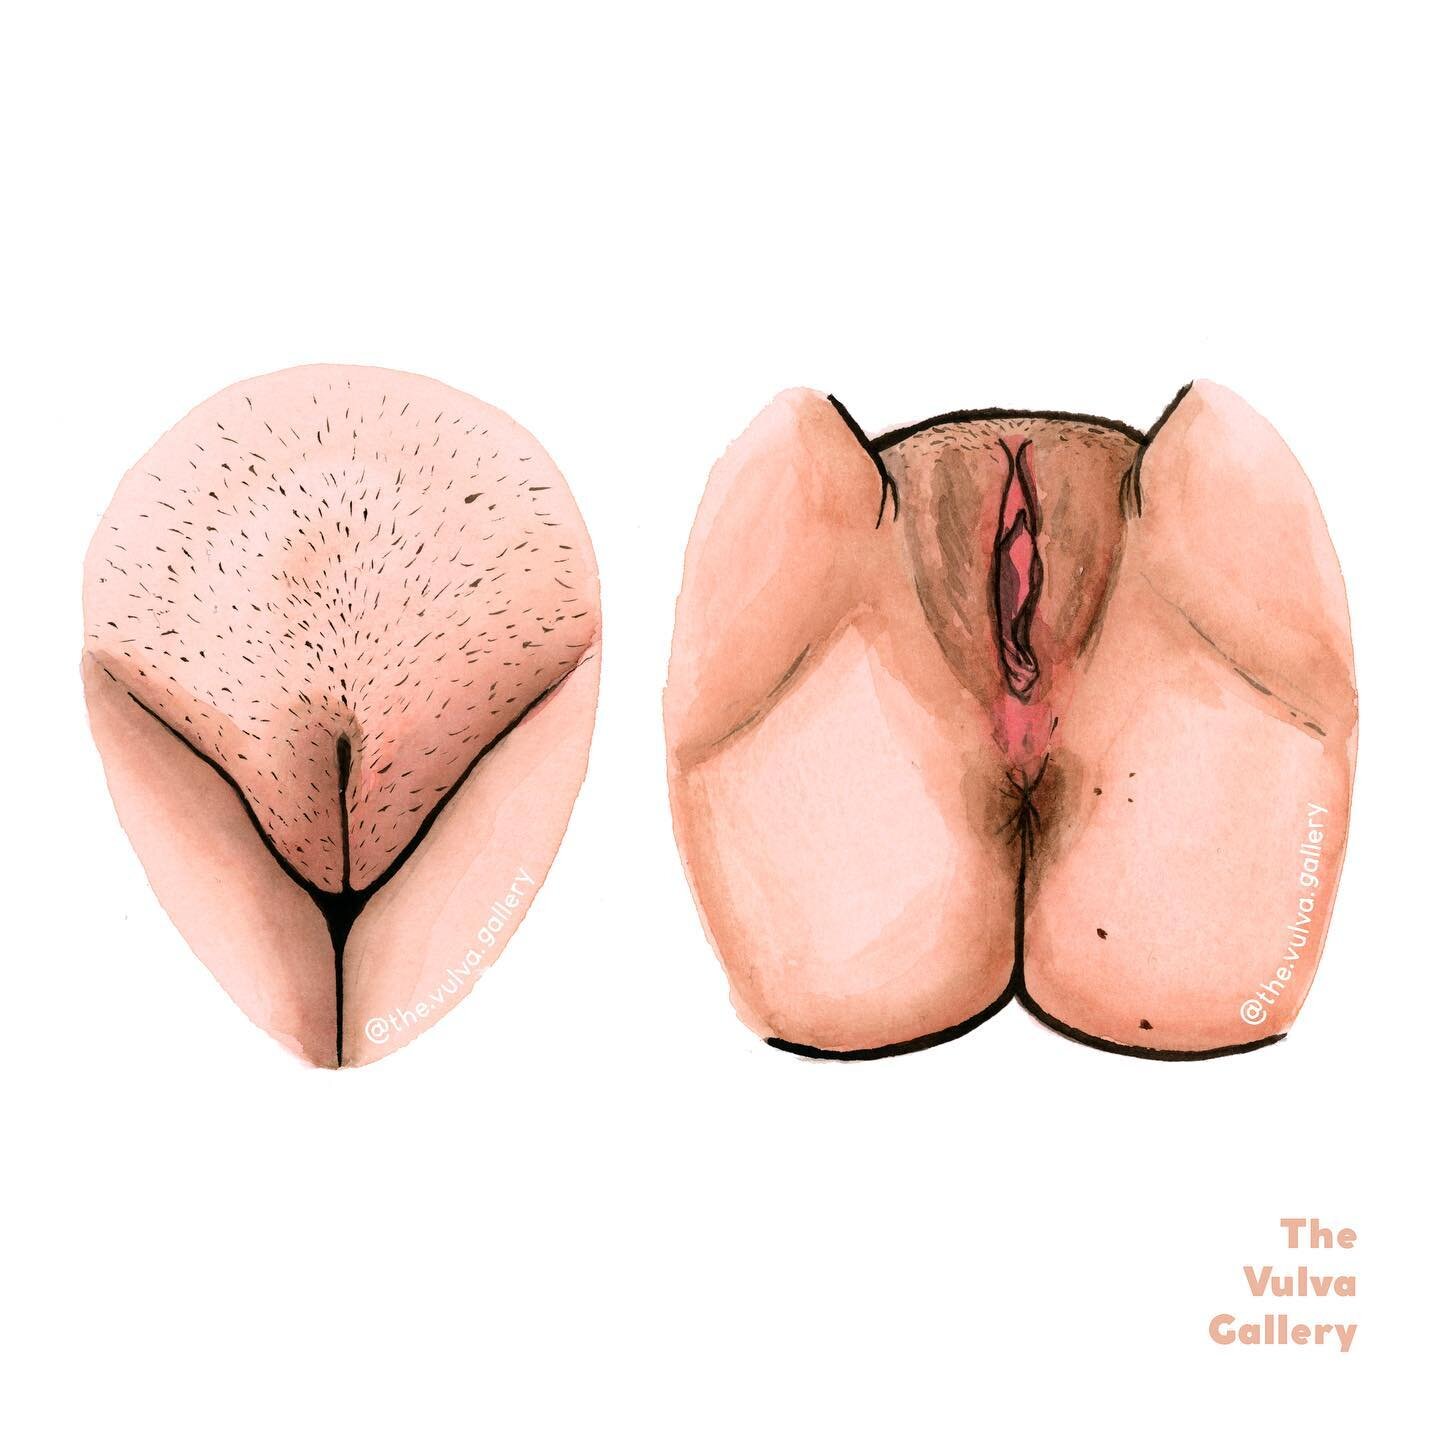 &ldquo;My relationship with my body has always been a rollercoaster, just like my relationship with my vulva. From an early age, I thought my vulva was not pretty at all and I hesitated to even take a closer look at it as I thought I would hate it ev